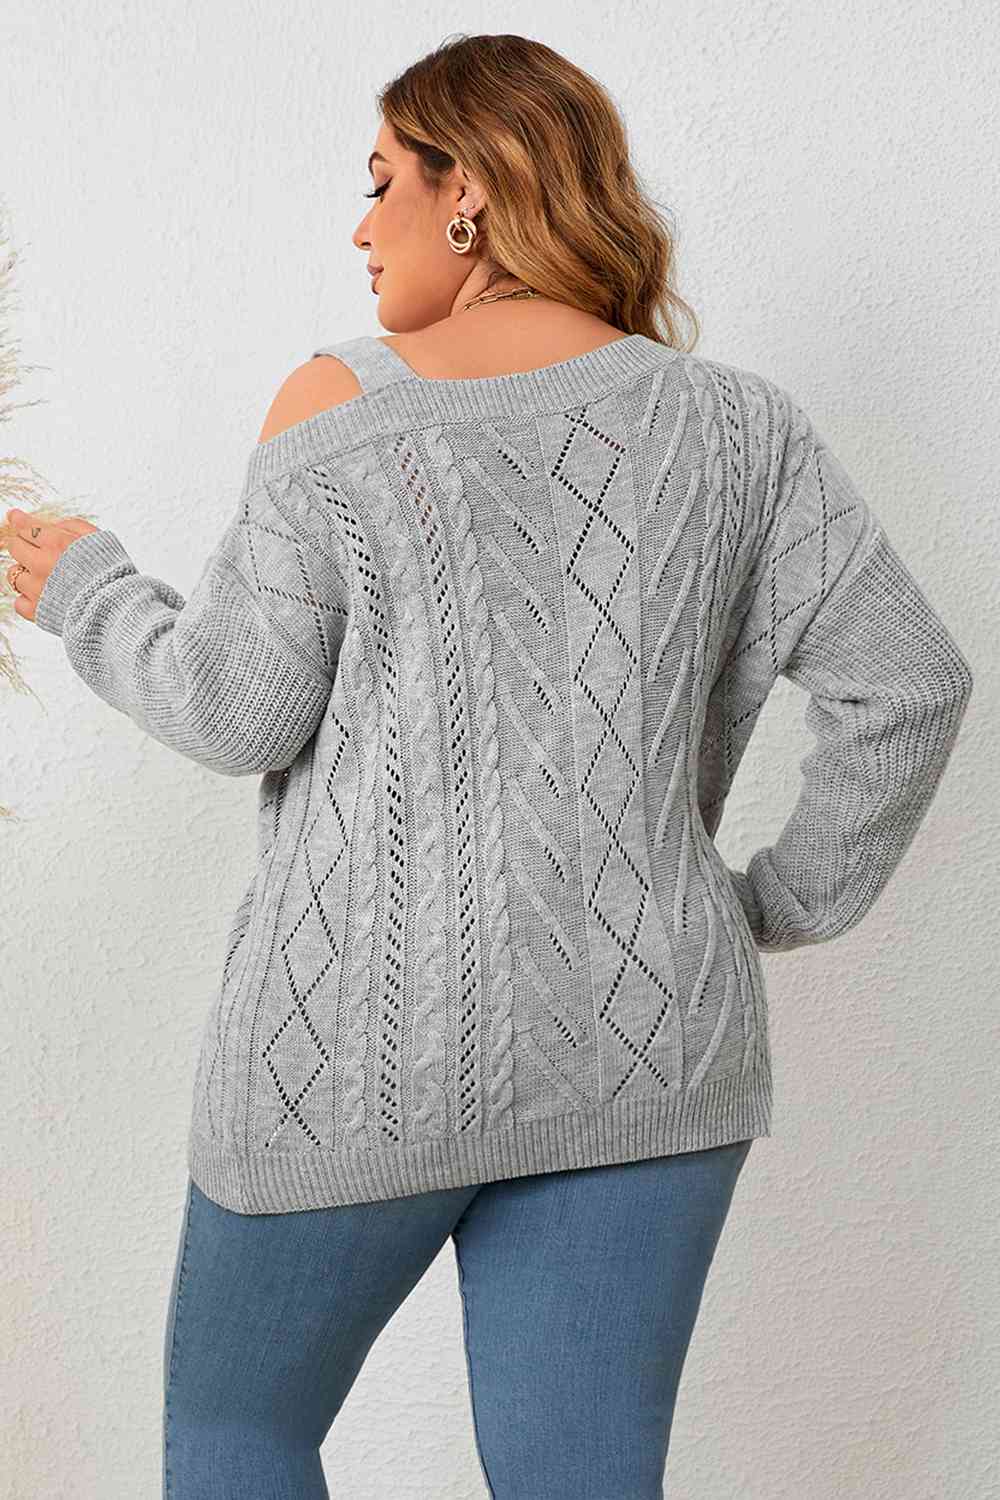 Plus Size Cold Shoulder Asymmetrical Cable-Knit Top - Just Enuff Sexy